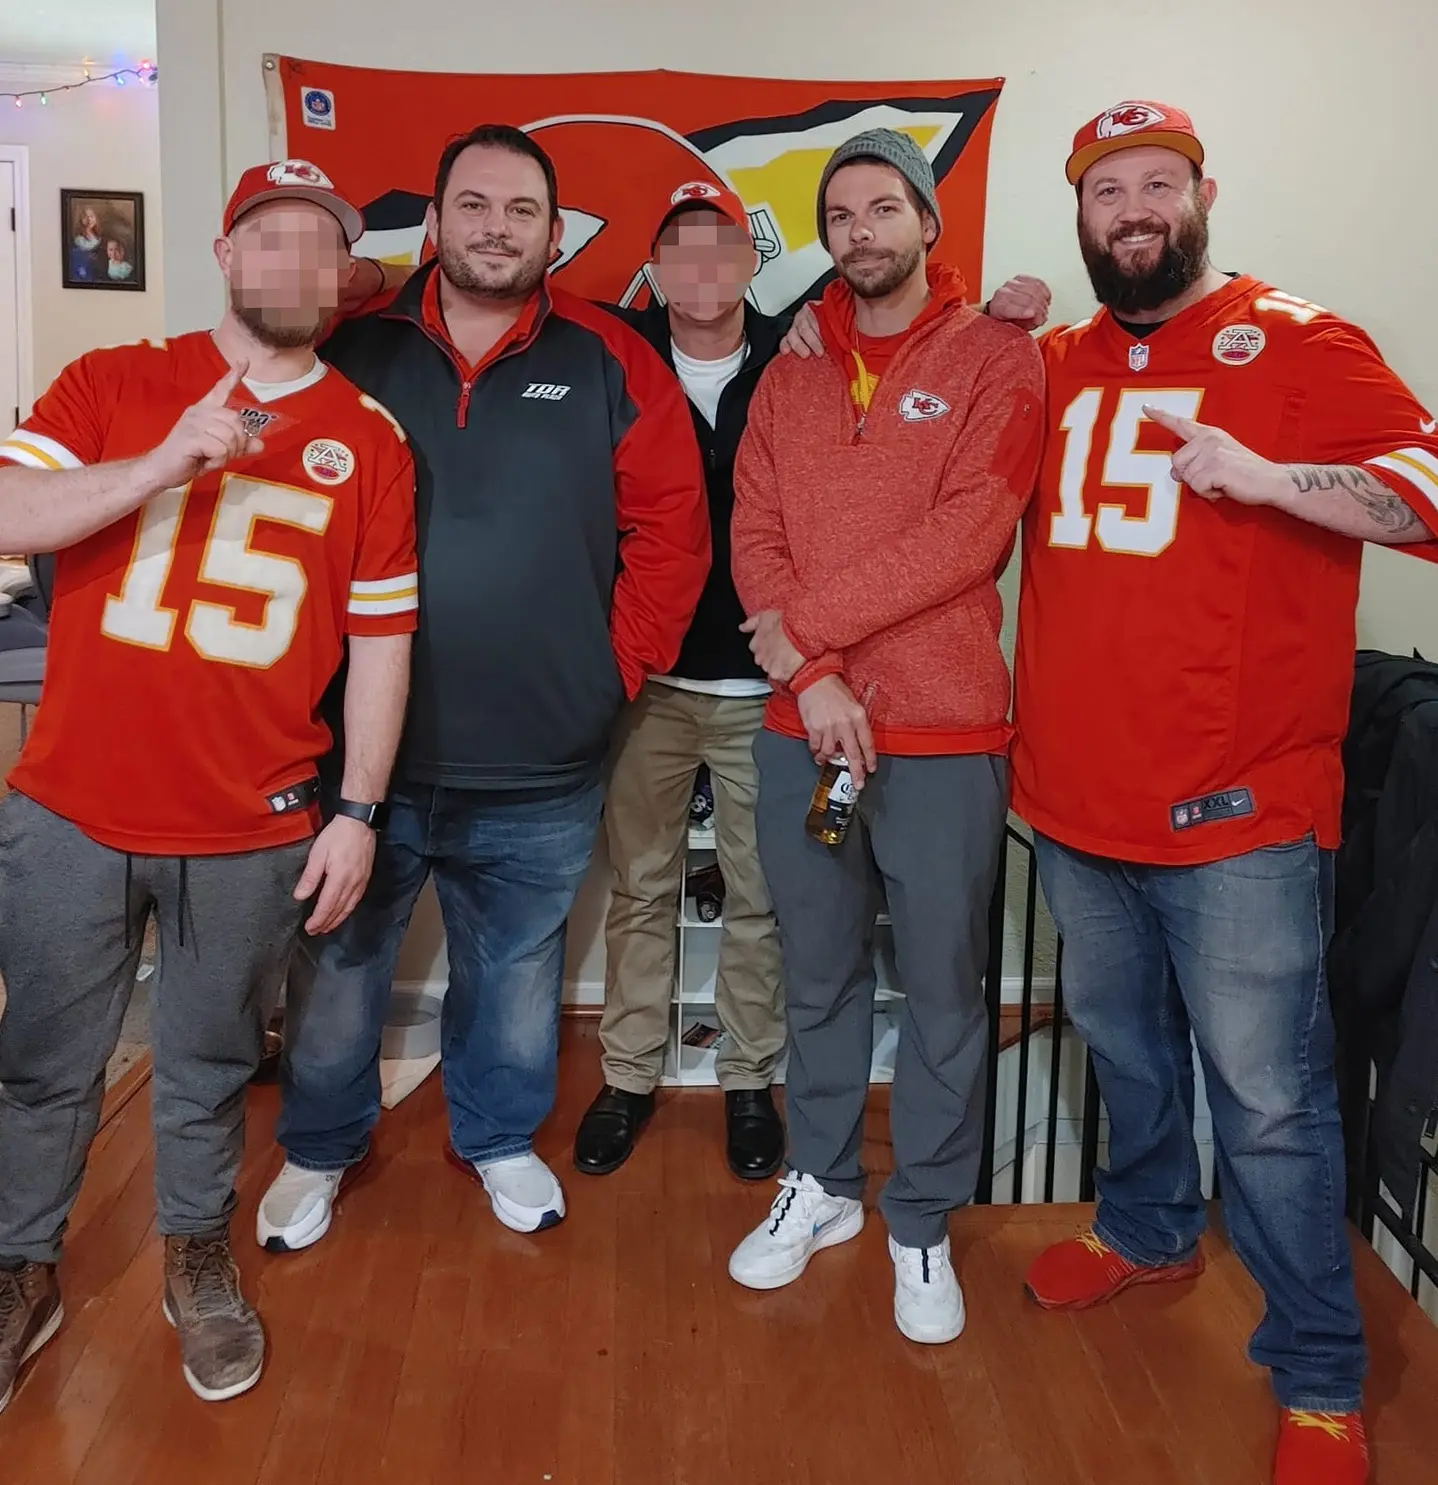 Chiefs Fan Jordan Willis Was Asleep For Two Days While Three of His Friends Froze to Death in His Backyard